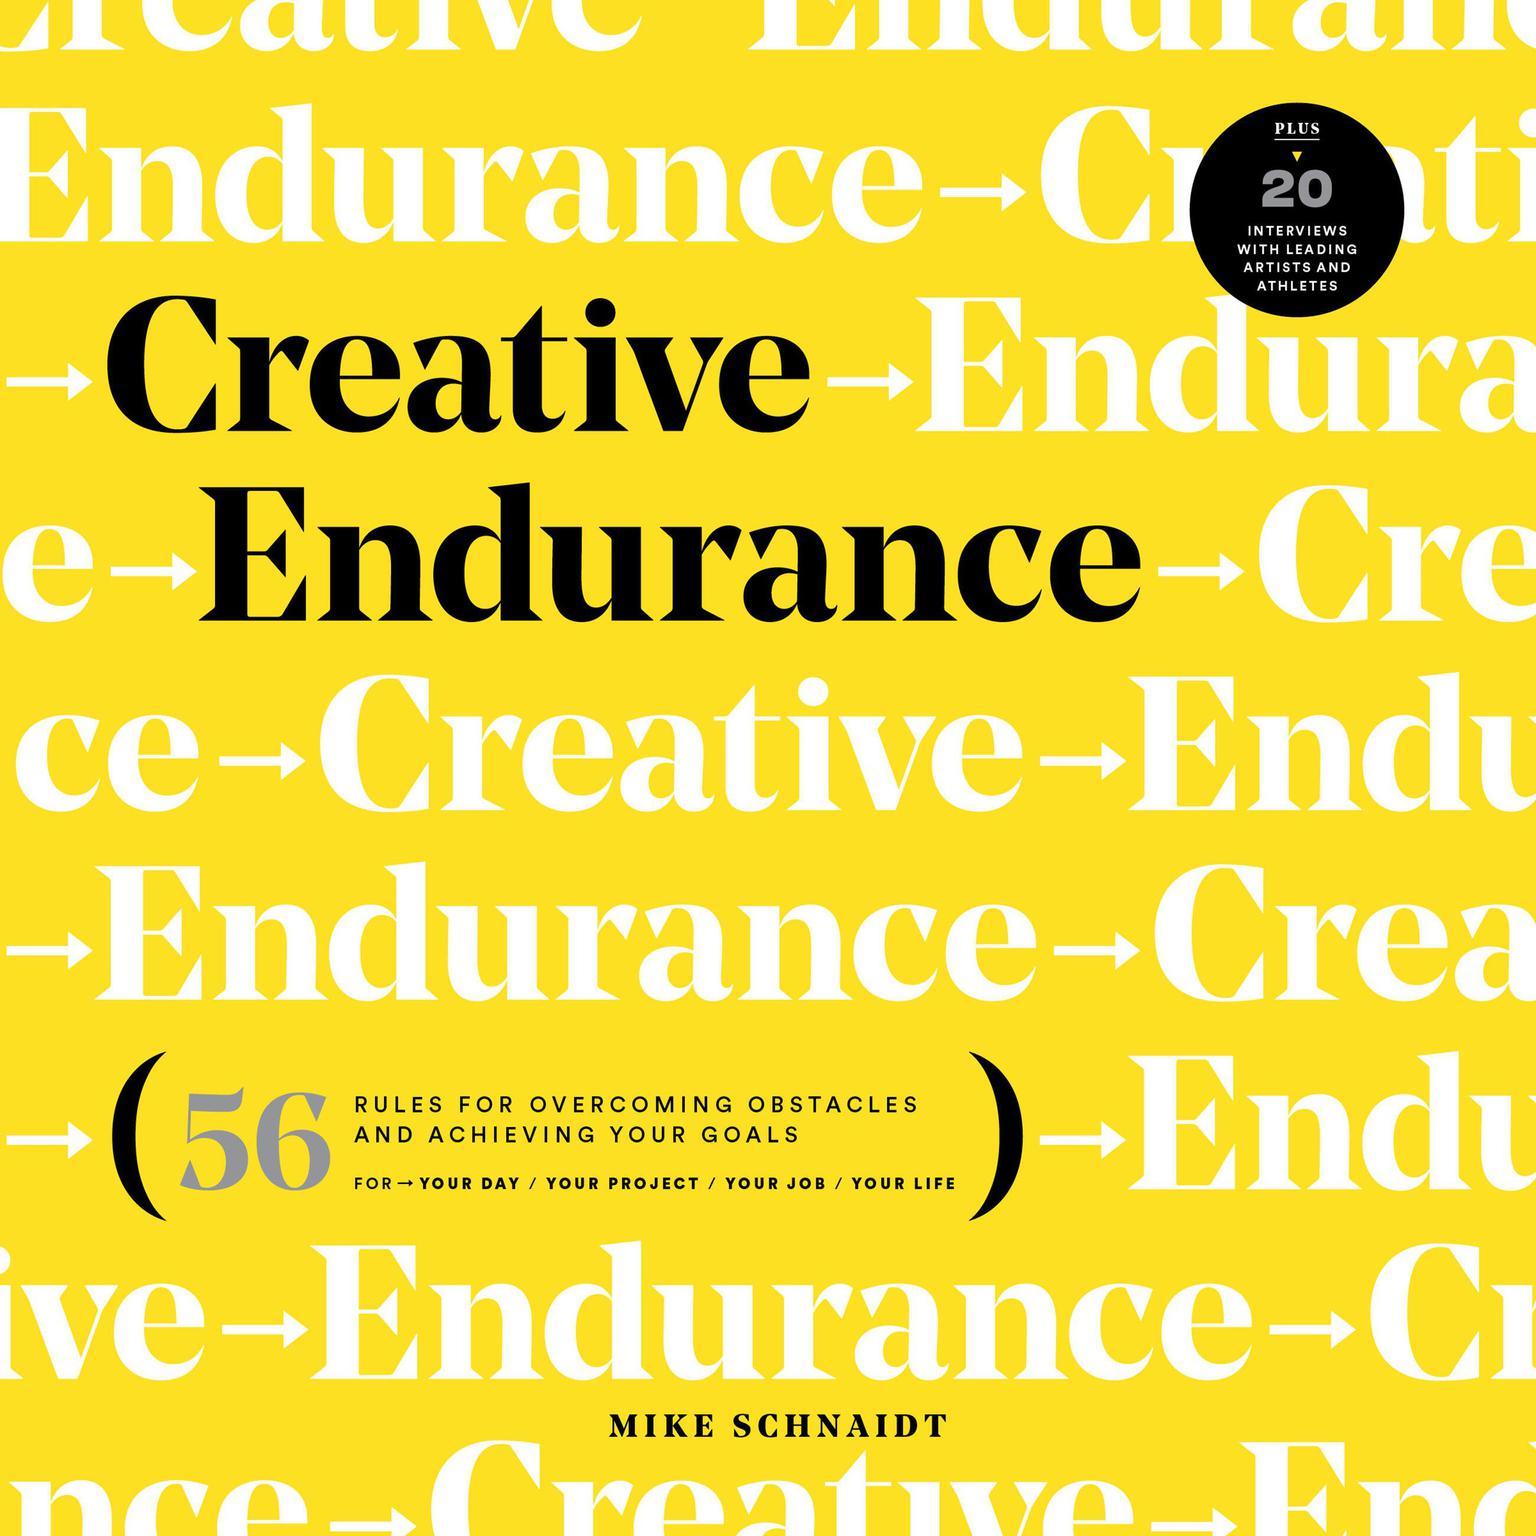 Creative Endurance: 56 Rules for Overcoming Obstacles and Achieving Your Goals - Plus 20 Interviews with Leading Artists and Athletes Audiobook, by Mike Schnaidt